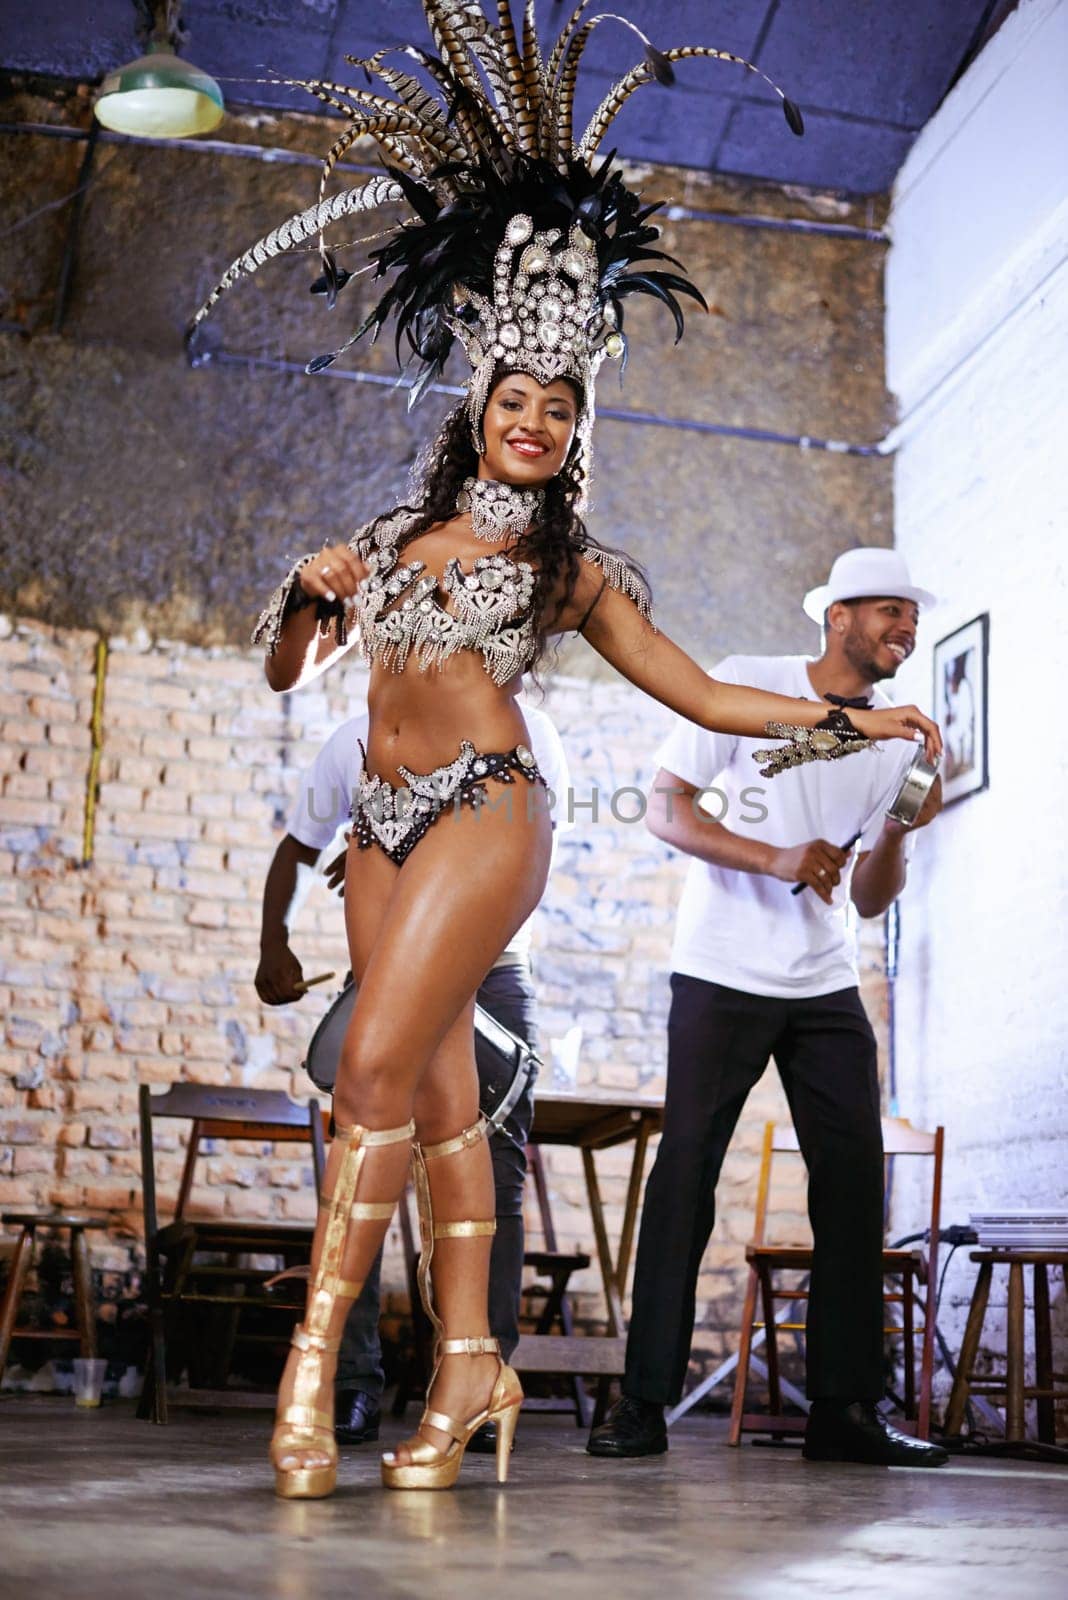 Women, happy and samba dancer for performance with smile or talent, fashion and drums for music in Brazil. Female person, costume and band at event or show for entertainment, celebration and heritage.